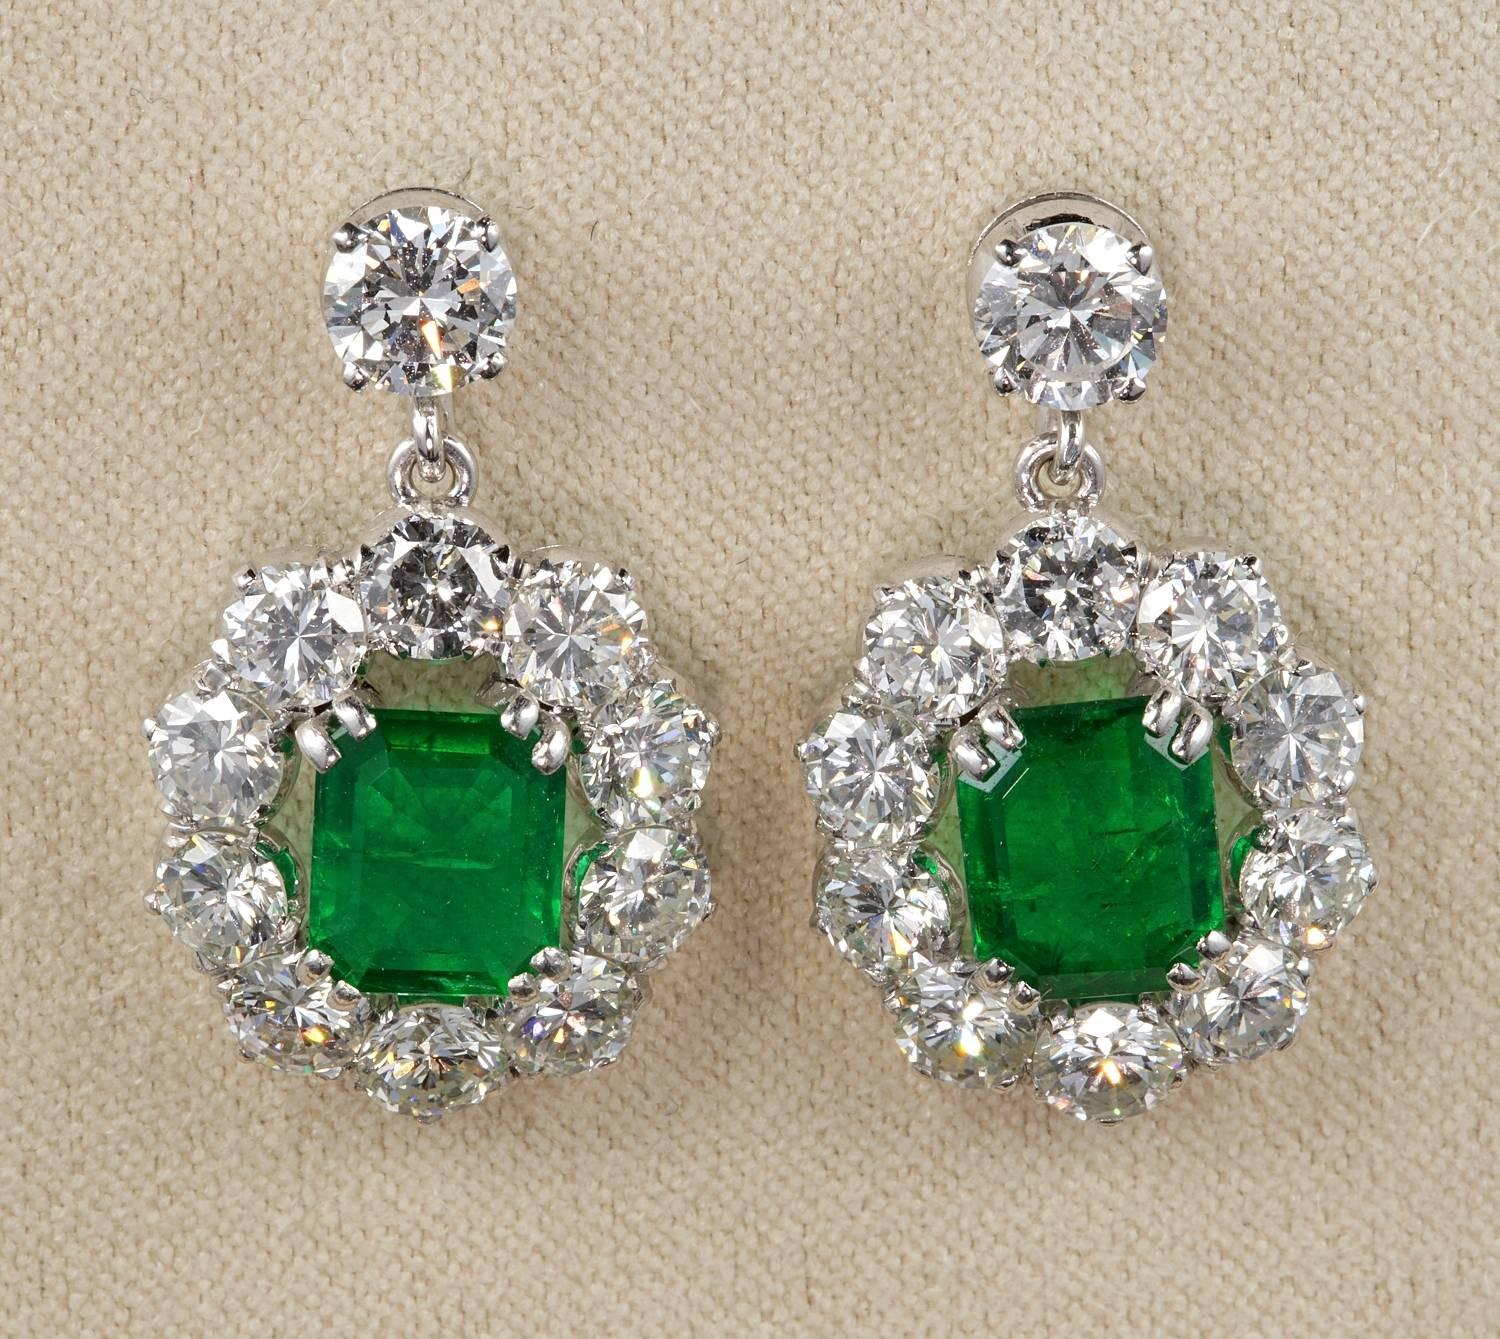 
Magnificent

What you find in these unique vintage pair of earrings is sheer quality of highest standards from start to finish

Exceptionally beautiful, highest in quality

1950 ca, classy swing drop design, all individually hand crafted of solid